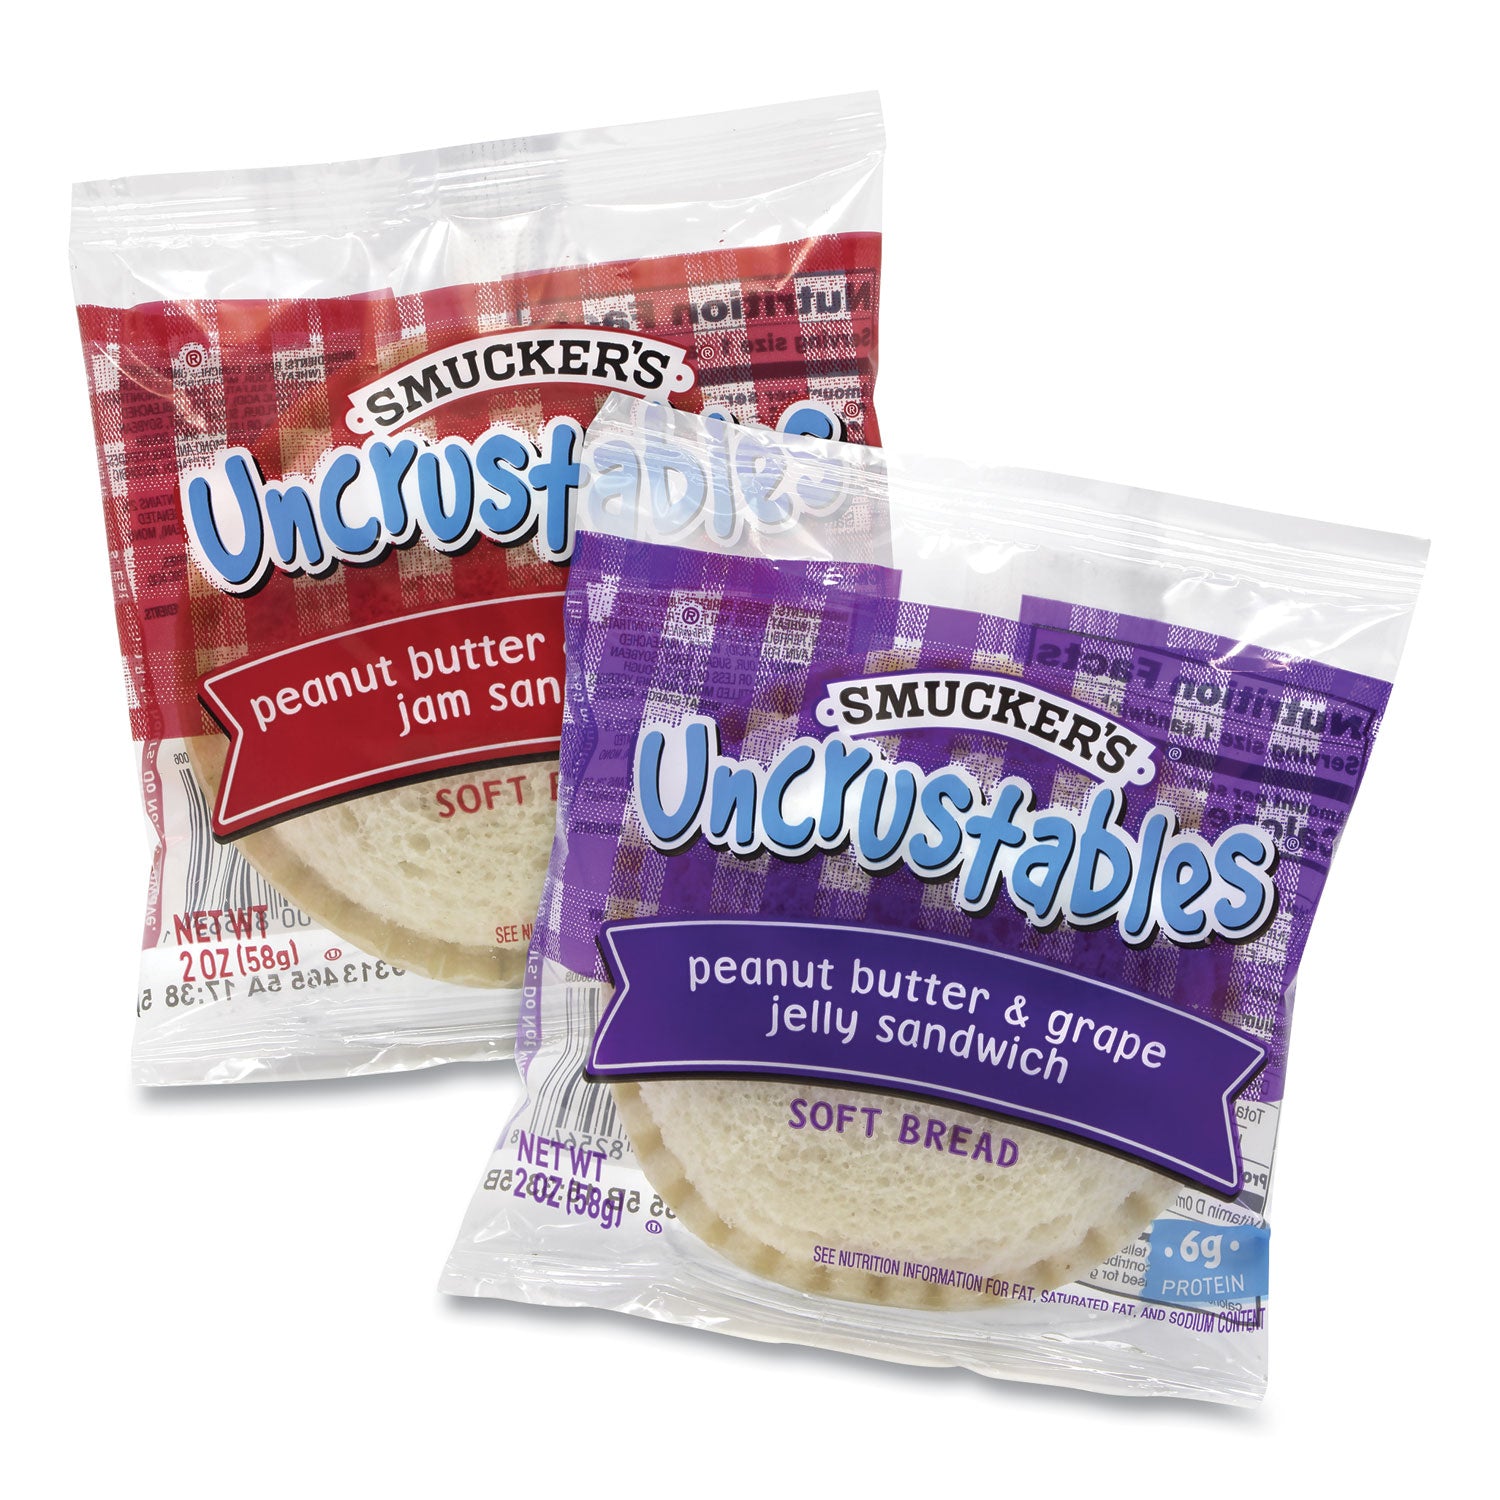 uncrustables-soft-bread-sandwiches-grape-strawberry-2-oz-10-sandwiches-pack-2-pk-box-ships-in-1-3-business-days_grr90300134 - 1